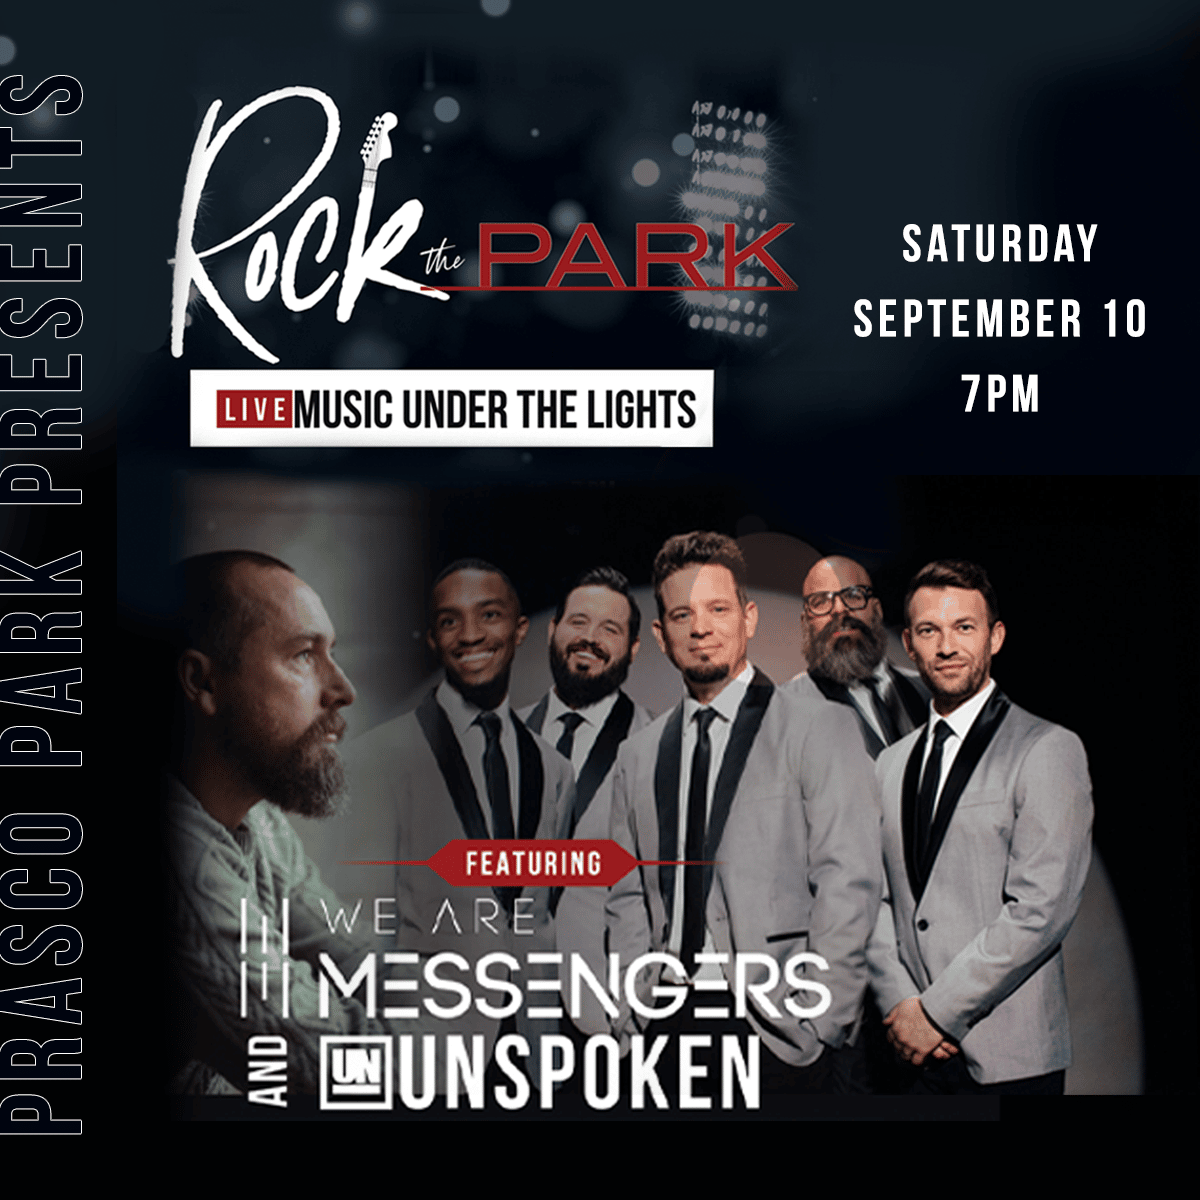 ROCK THE PARK! with We Are Messengers and Unspoken (SOLD OUT) STAR 93.3